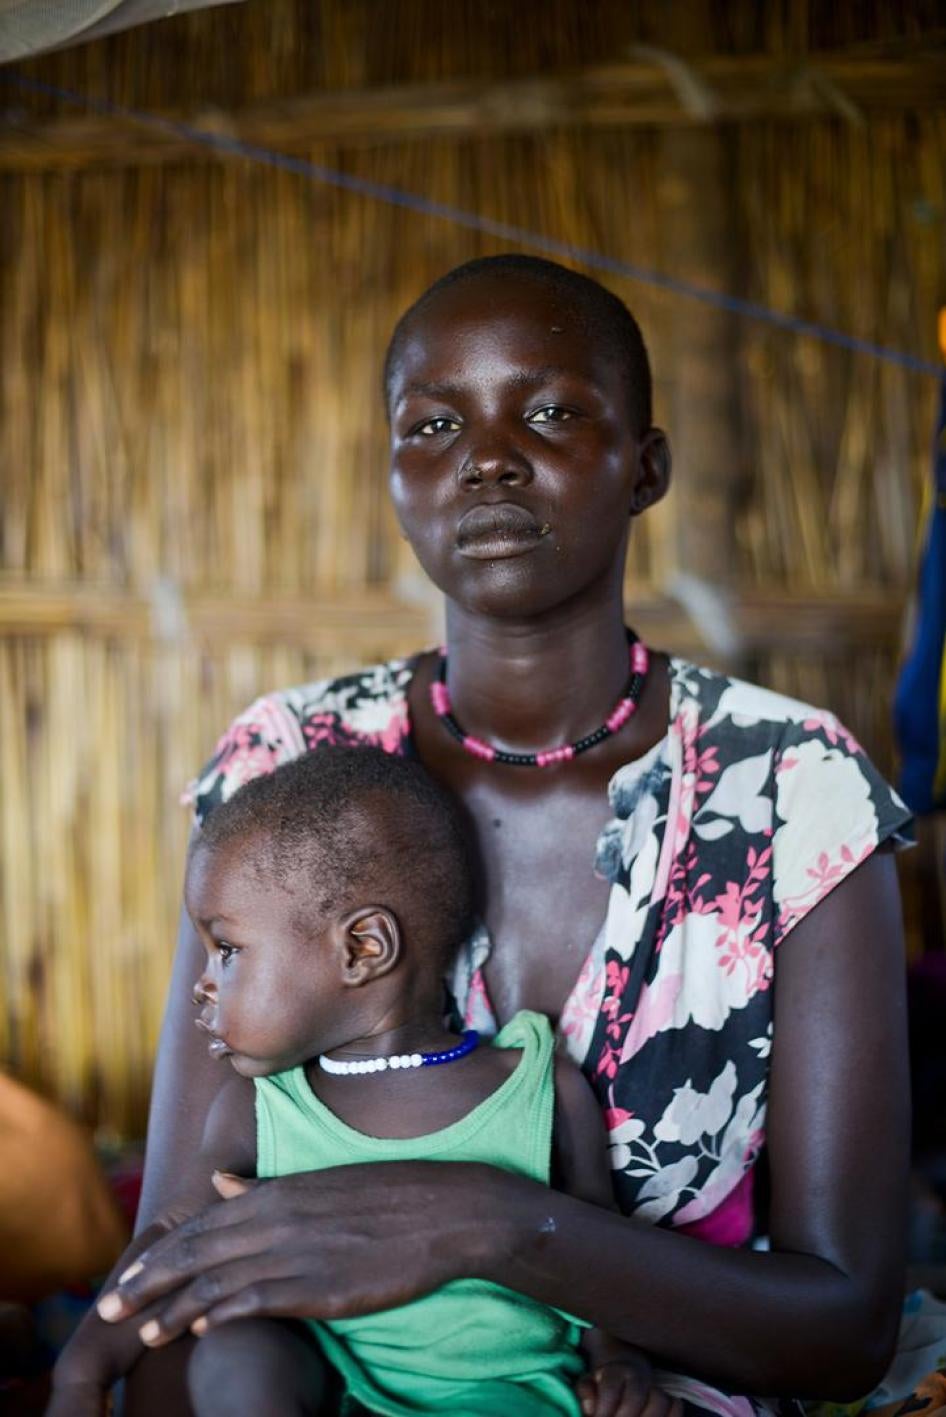 Nyacour and her daughter were forced to flee to the UNMISS camp near Bentiu after Bul fighters burned down her home and beat her, when they attacked Koch county in May 2015. Her husband is still hiding in the bush.  